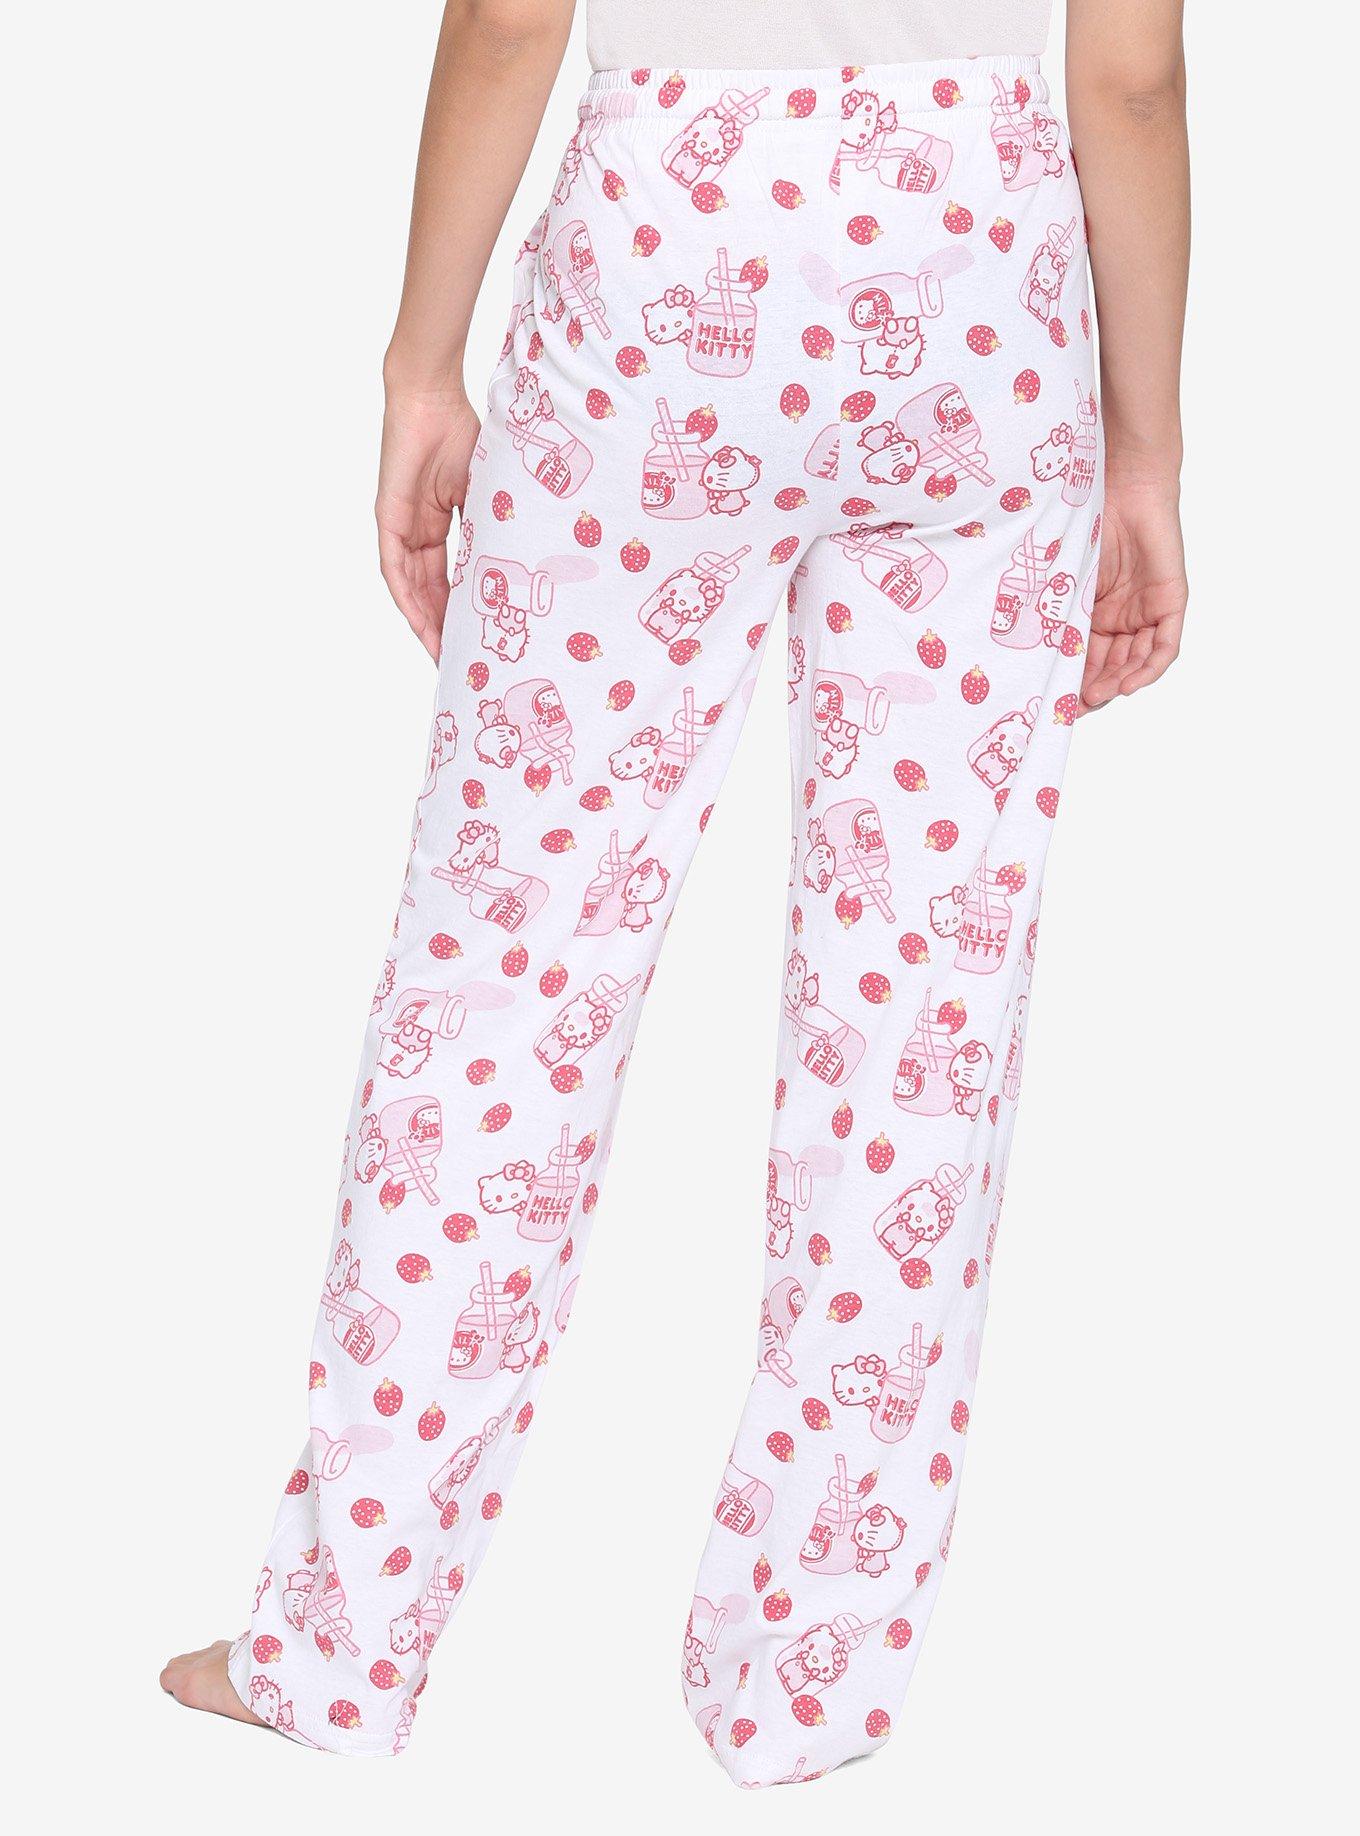 Nissin Cup Noodles X Hello Kitty Red Girls Pajama Pants Plus Size, Hot  Topic